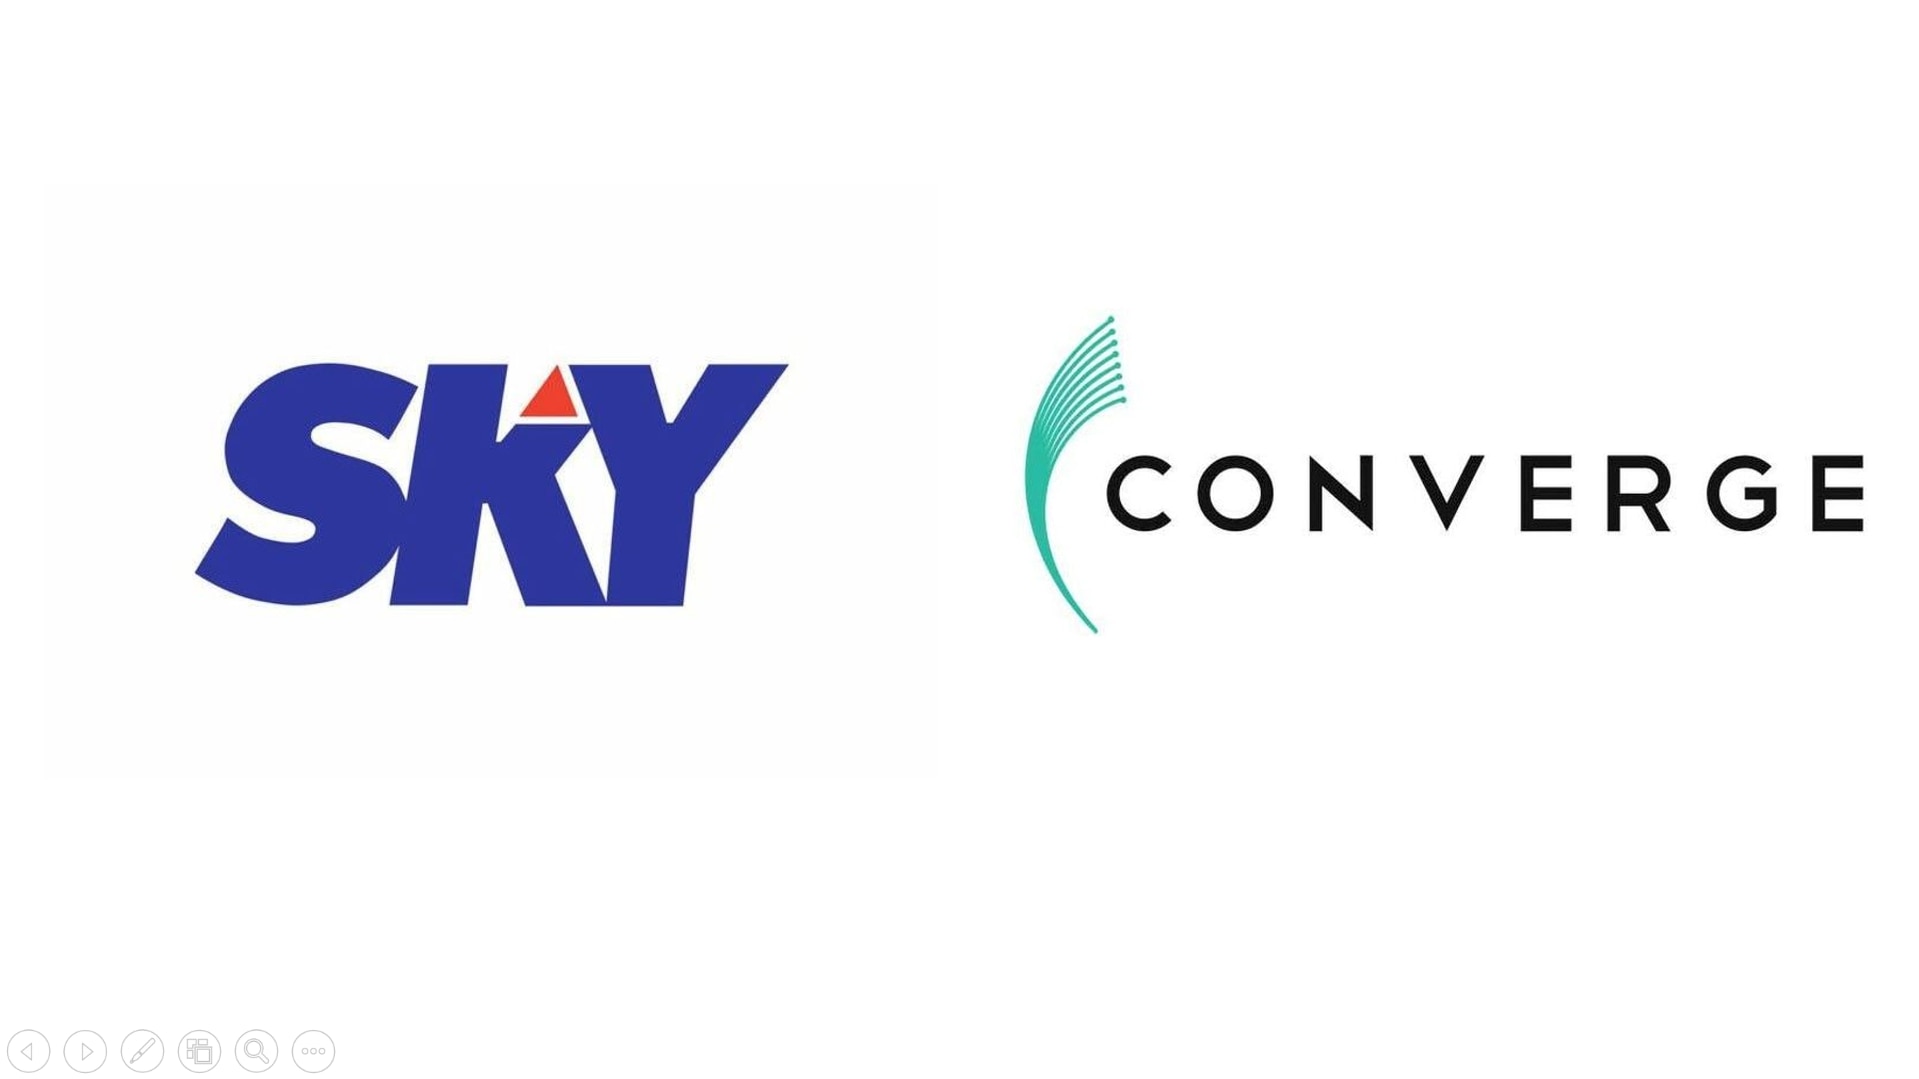 Sky Cable teams up with Converge to deliver faster, superior internet service